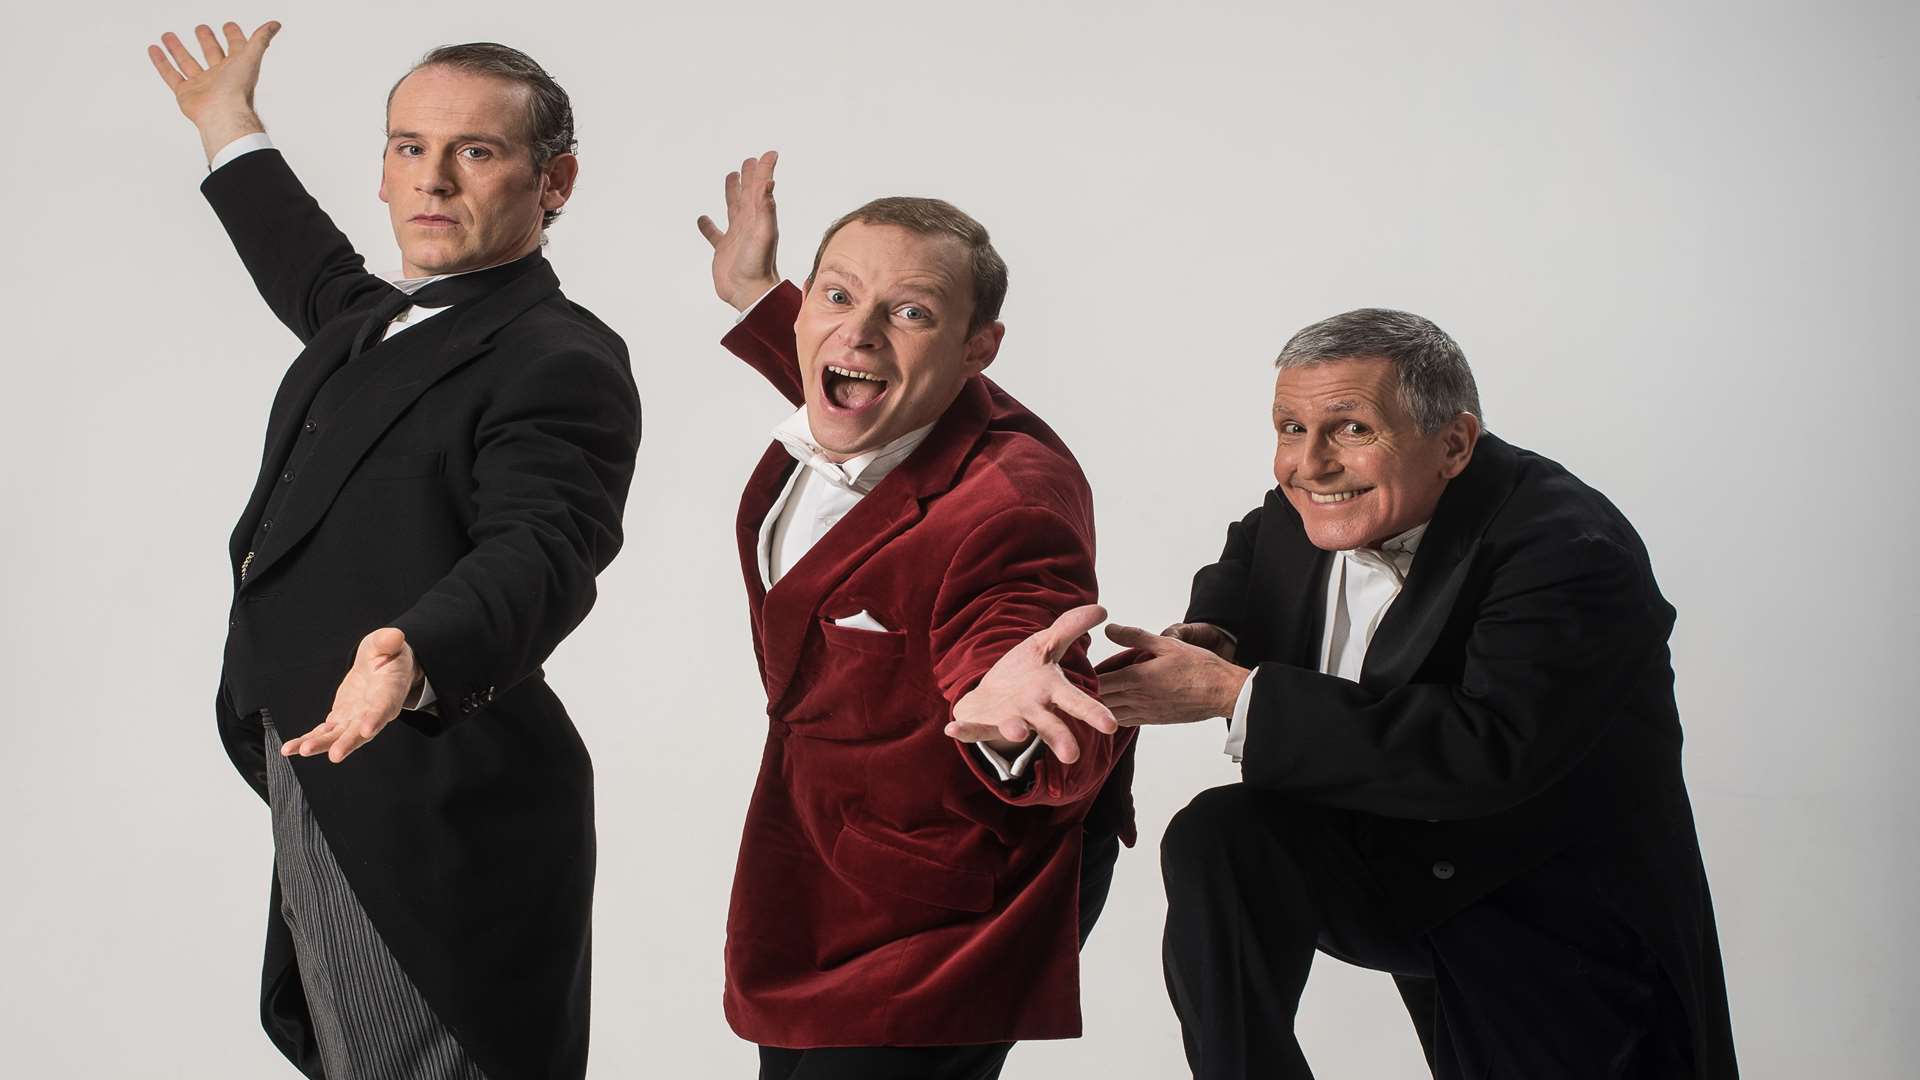 Jason Thorpe as Jeeves, Robert Webb as Wooster and Christopher Ryan as Seppings in Jeeves and Wooster in Perfect Nonsense